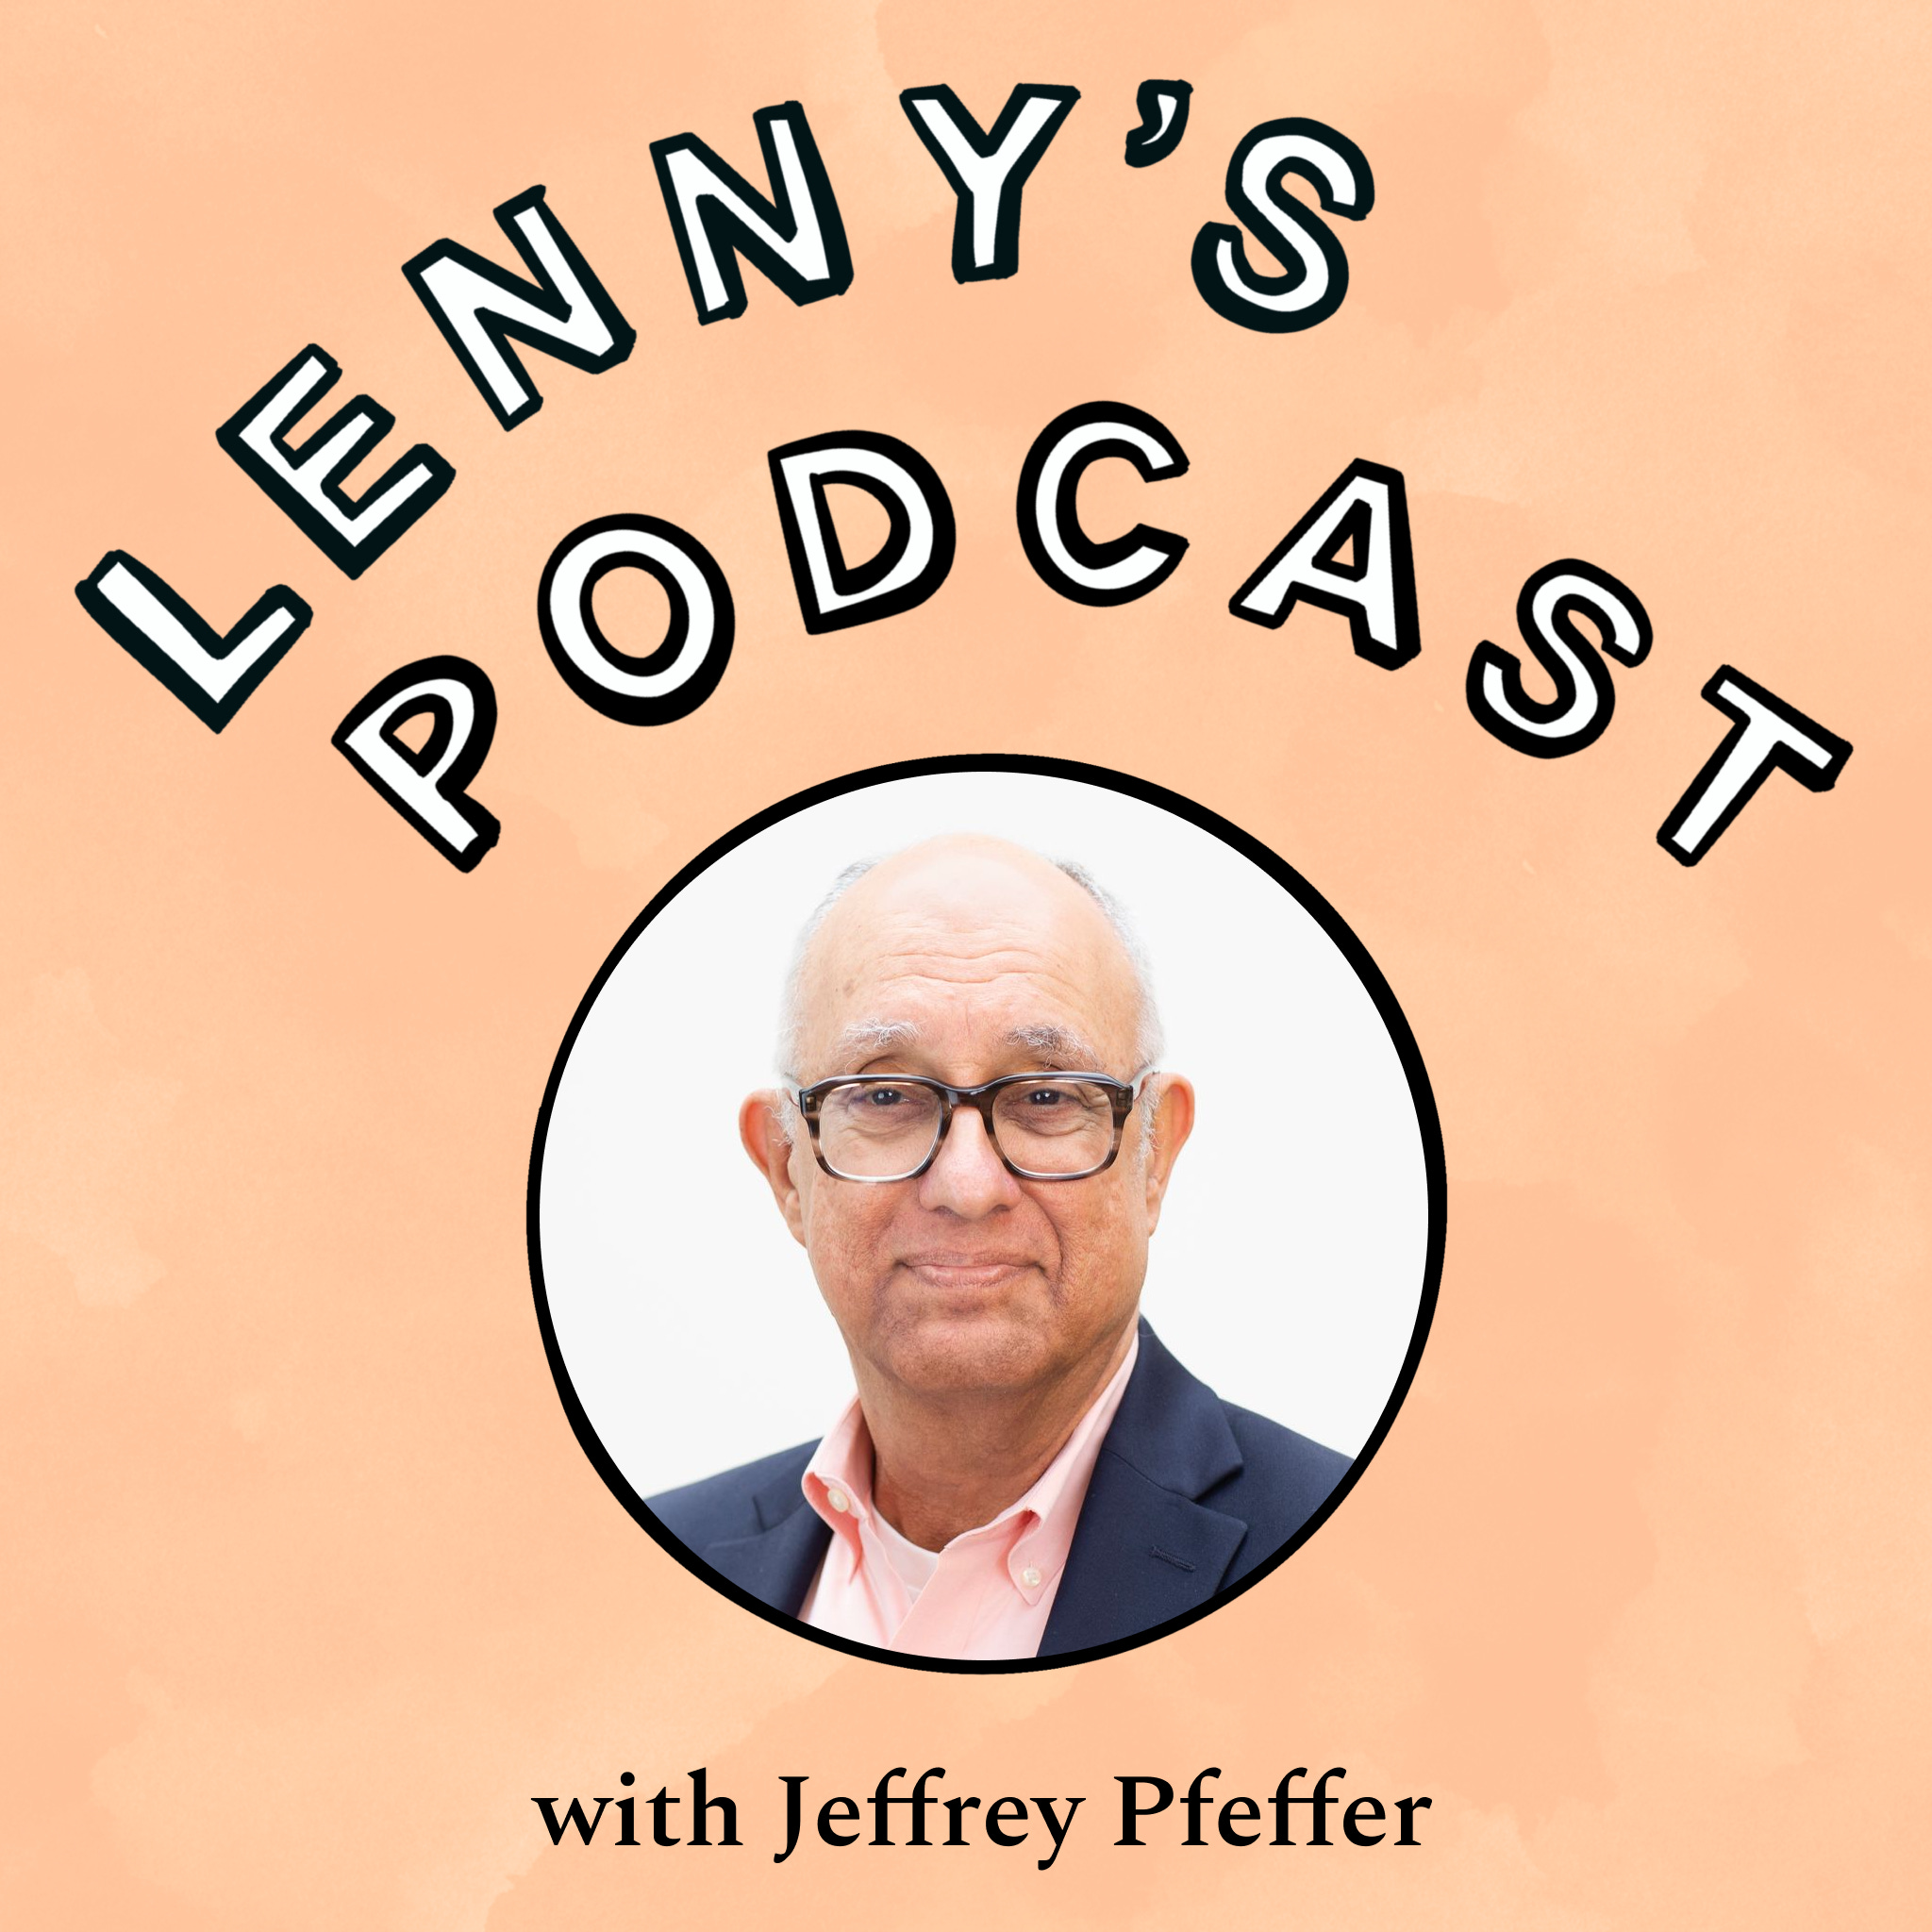 The paths to power: How to grow your influence and advance your career | Jeffrey Pfeffer (author of 7 Rules of Power, professor at Stanford GSB)